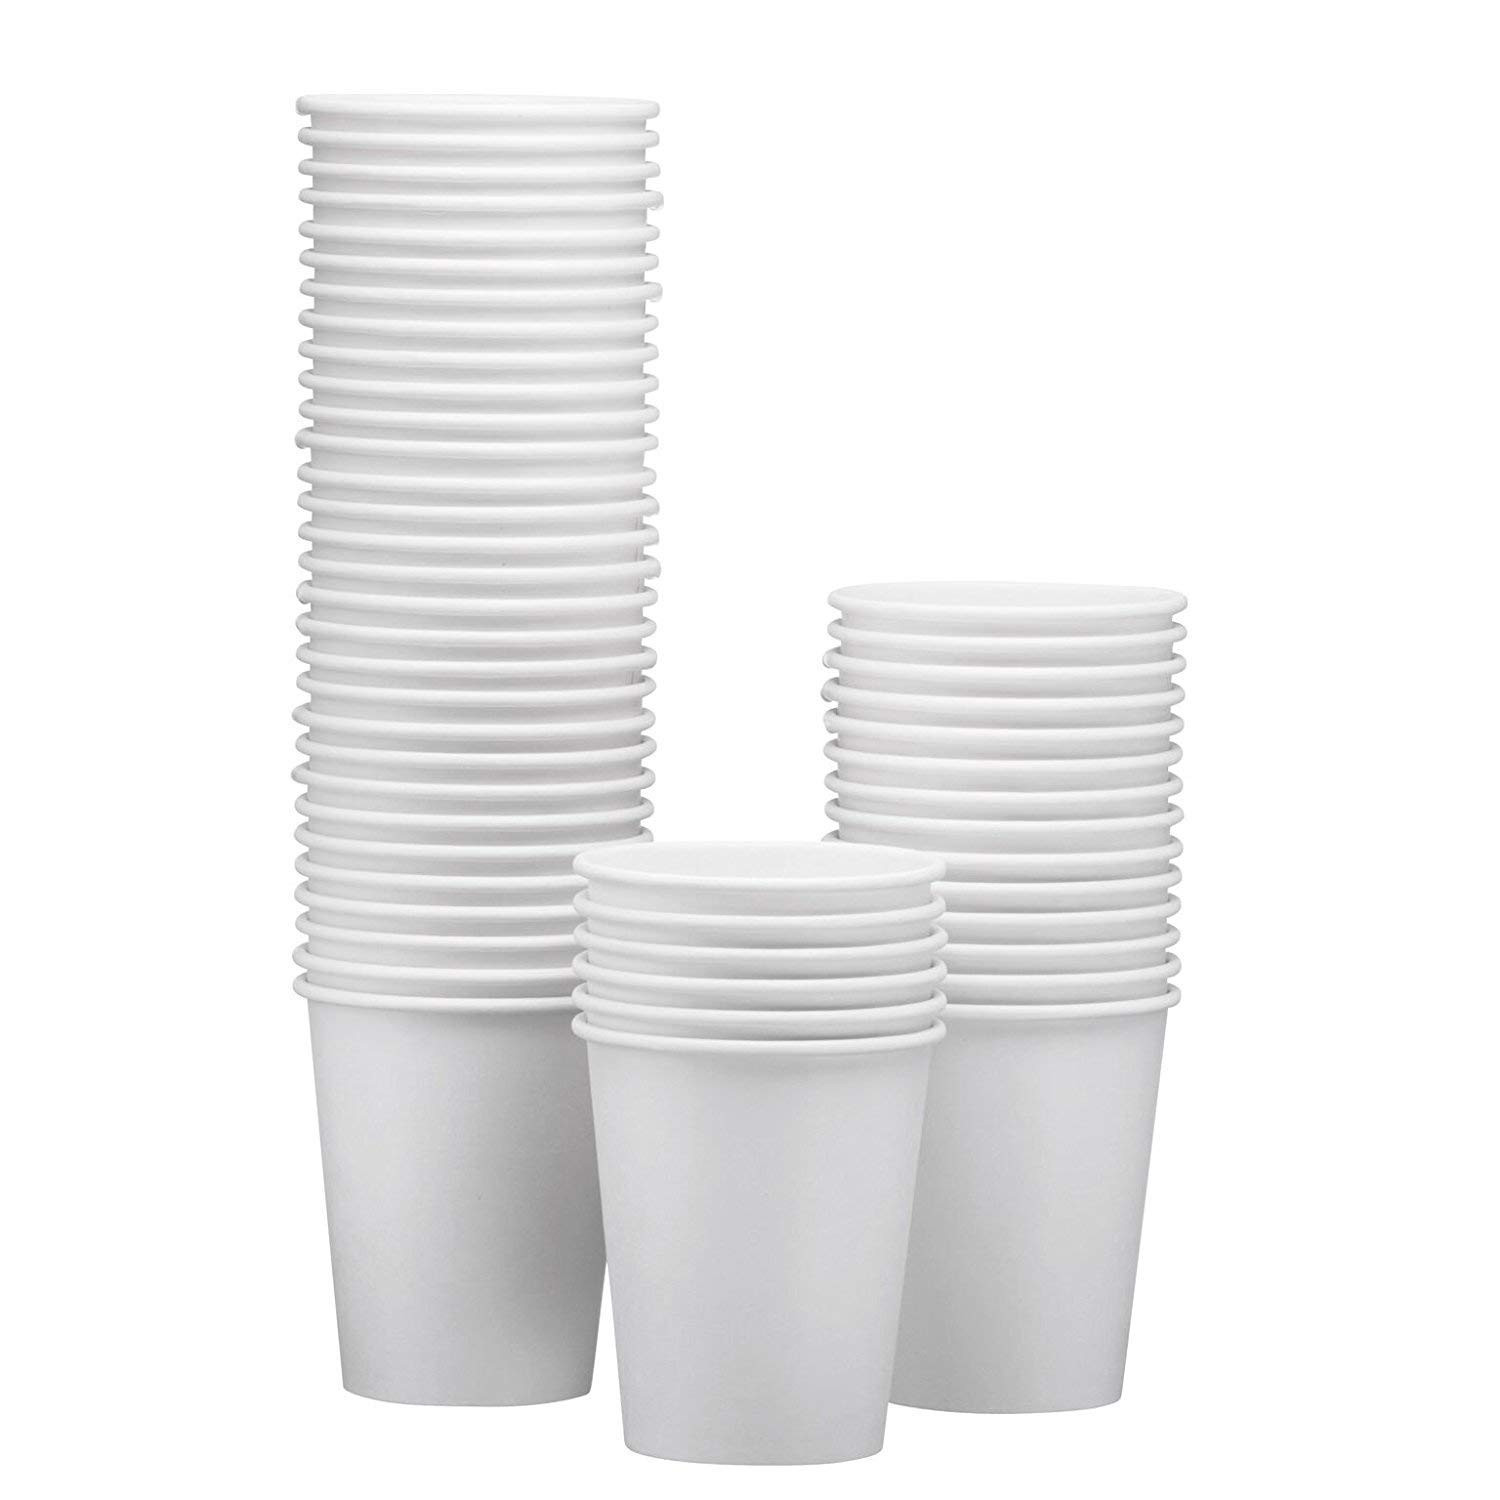 25 Stunning 24 Inch Cylinder Vases Bulk 2024 free download 24 inch cylinder vases bulk of amazon com white paper hot cup 12 ounce capacity pack of 50 with amazon com white paper hot cup 12 ounce capacity pack of 50 kitchen dining